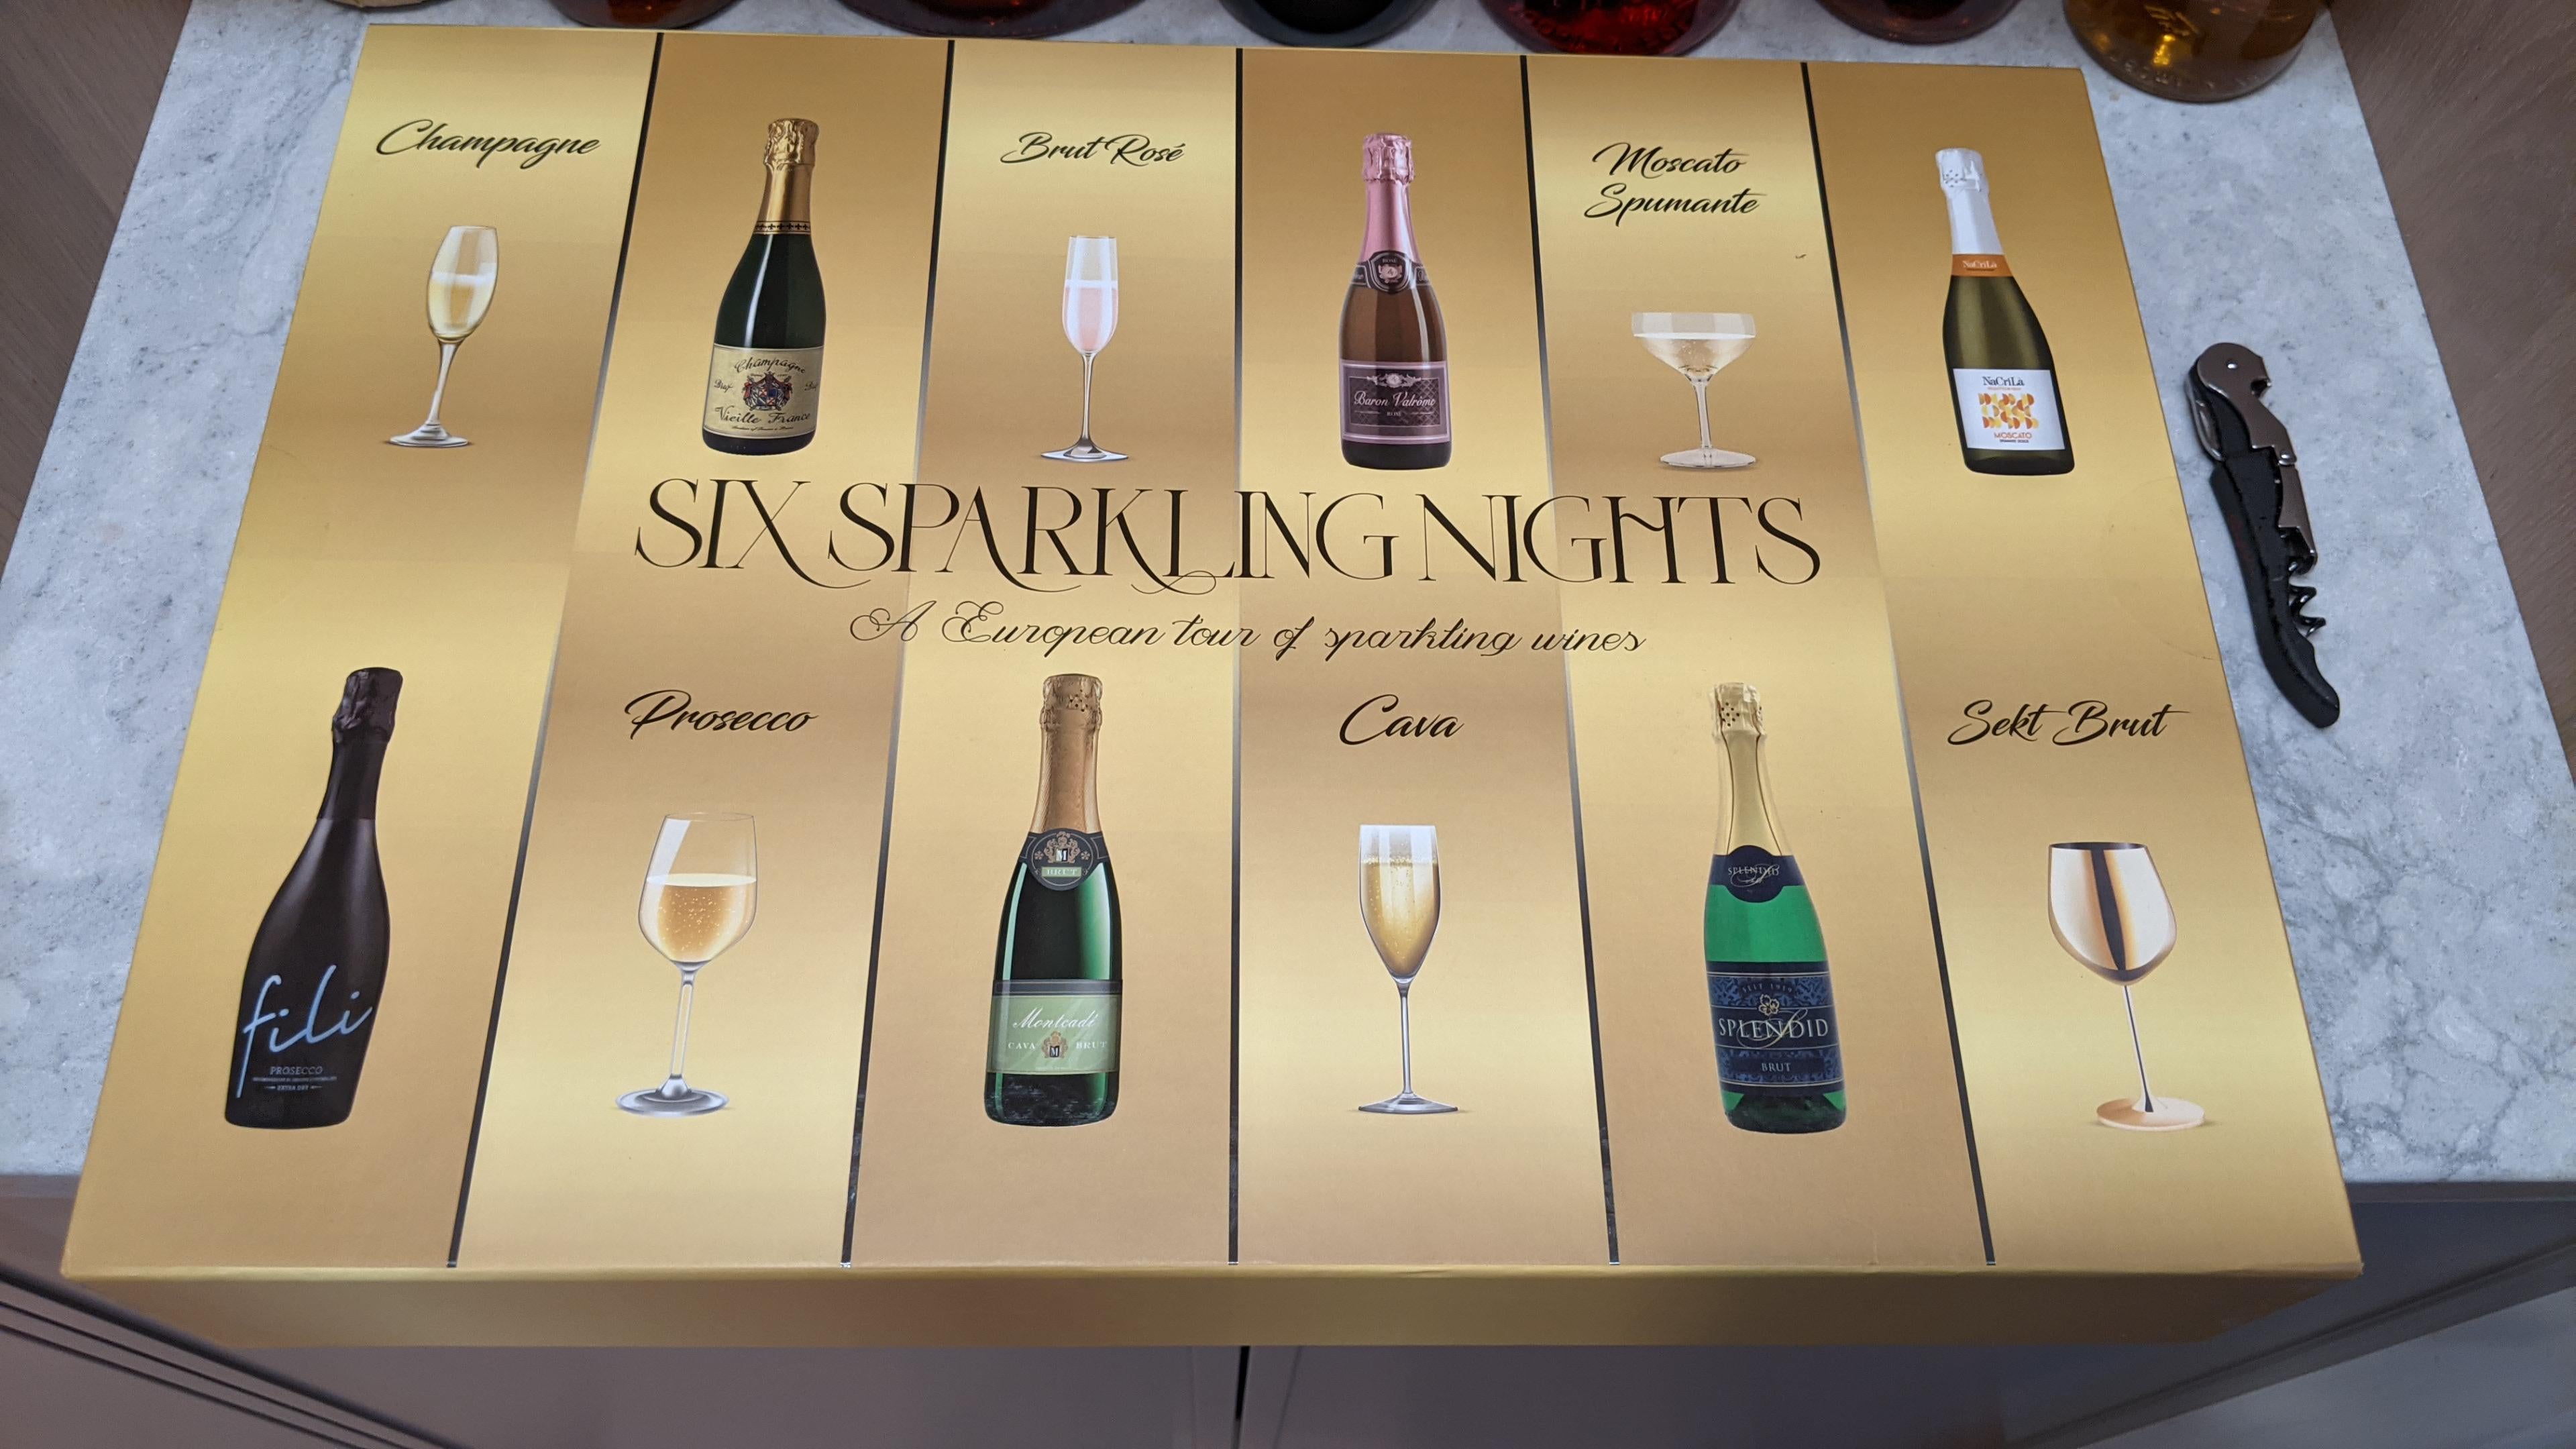 Costco’s Six Sparkling Nights A European tour of sparkling wine